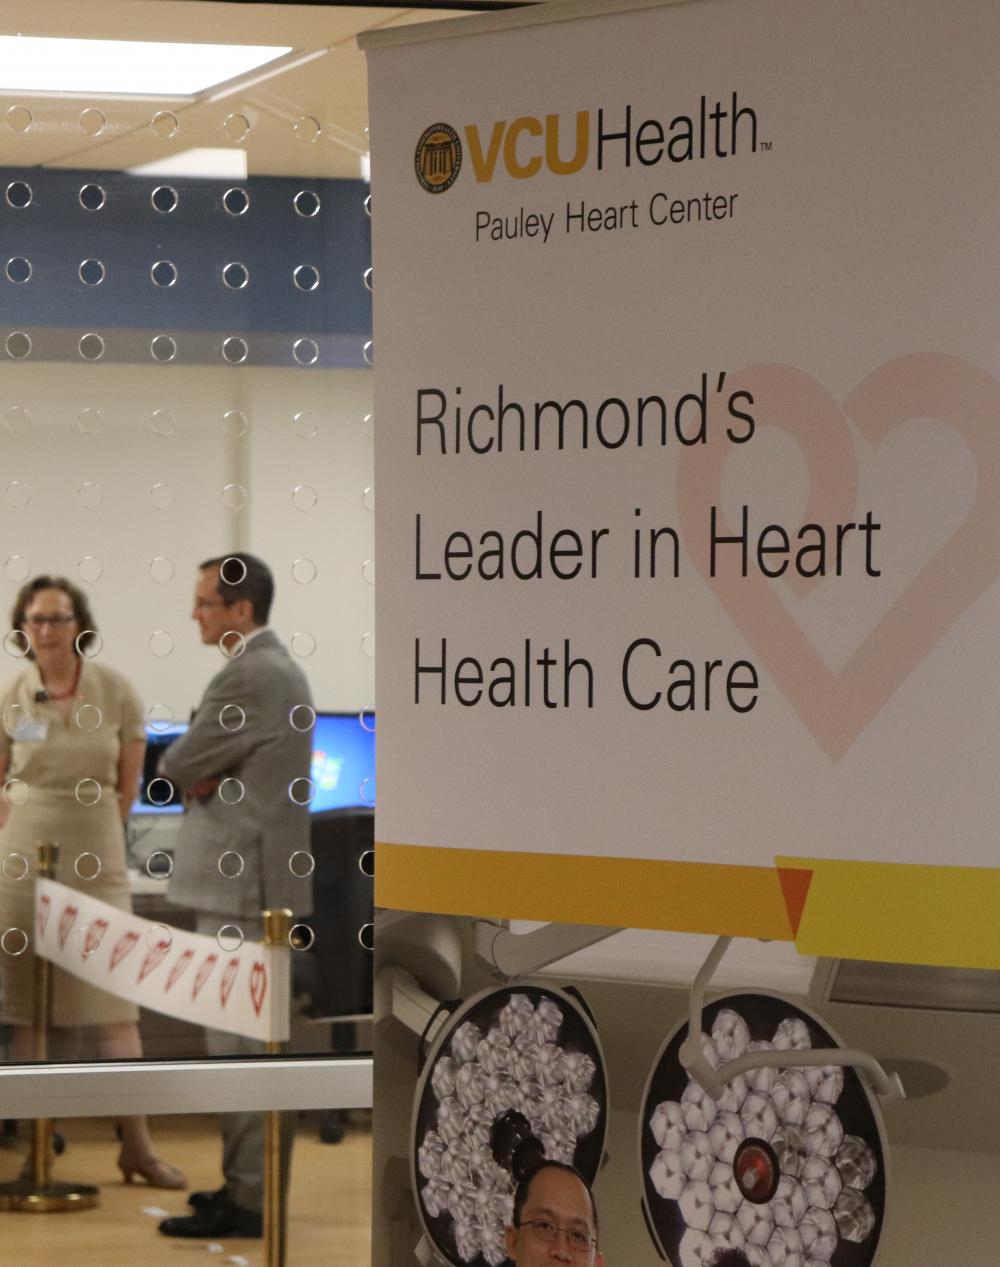 In the background, Marsha Rappley, M.D., vice president for health sciences and CEO of the VCU Health System, and William Hundley, M.D., director of the Pauley Heart Center, prepare for the ribbon cutting at VCU Health’s new Cardiac Imaging Suite.